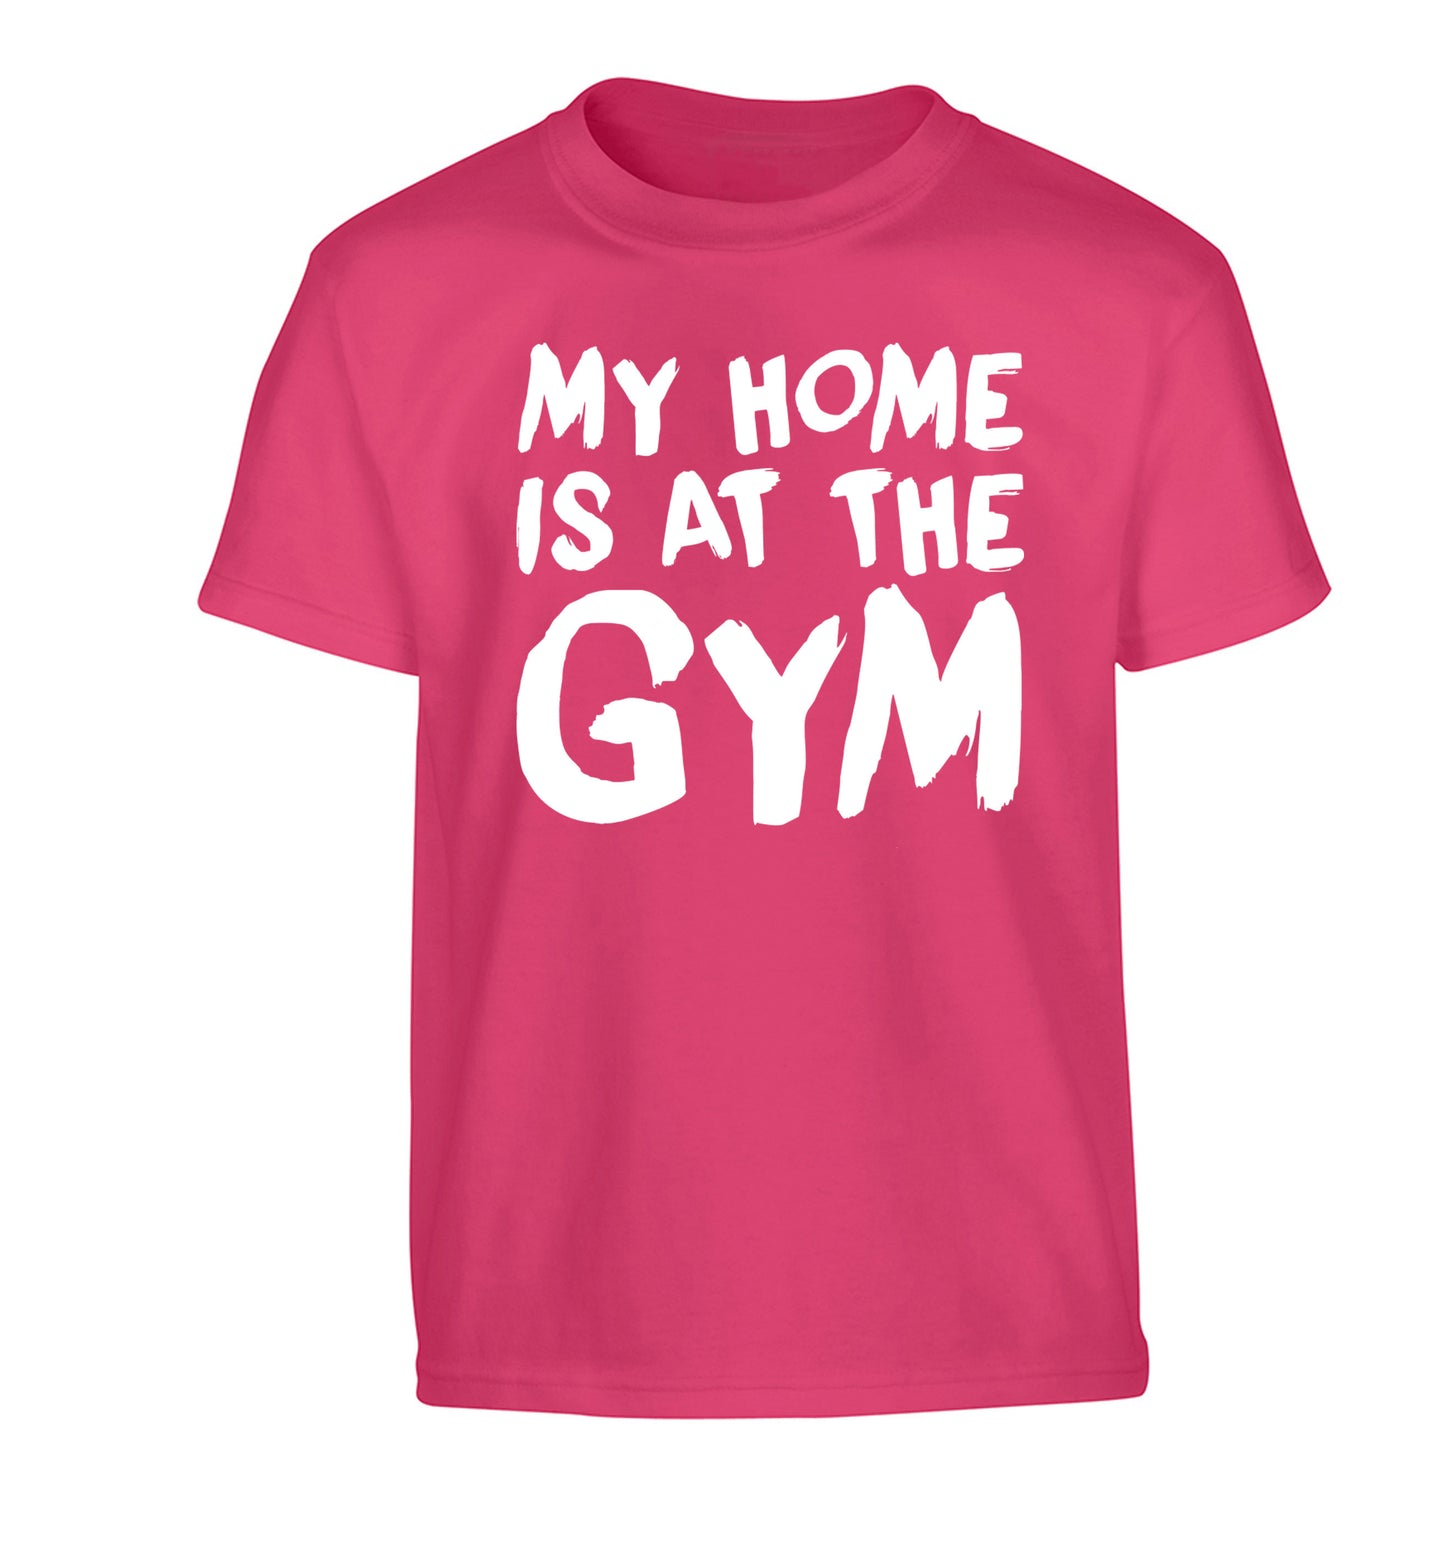 My home is at the gym Children's pink Tshirt 12-14 Years